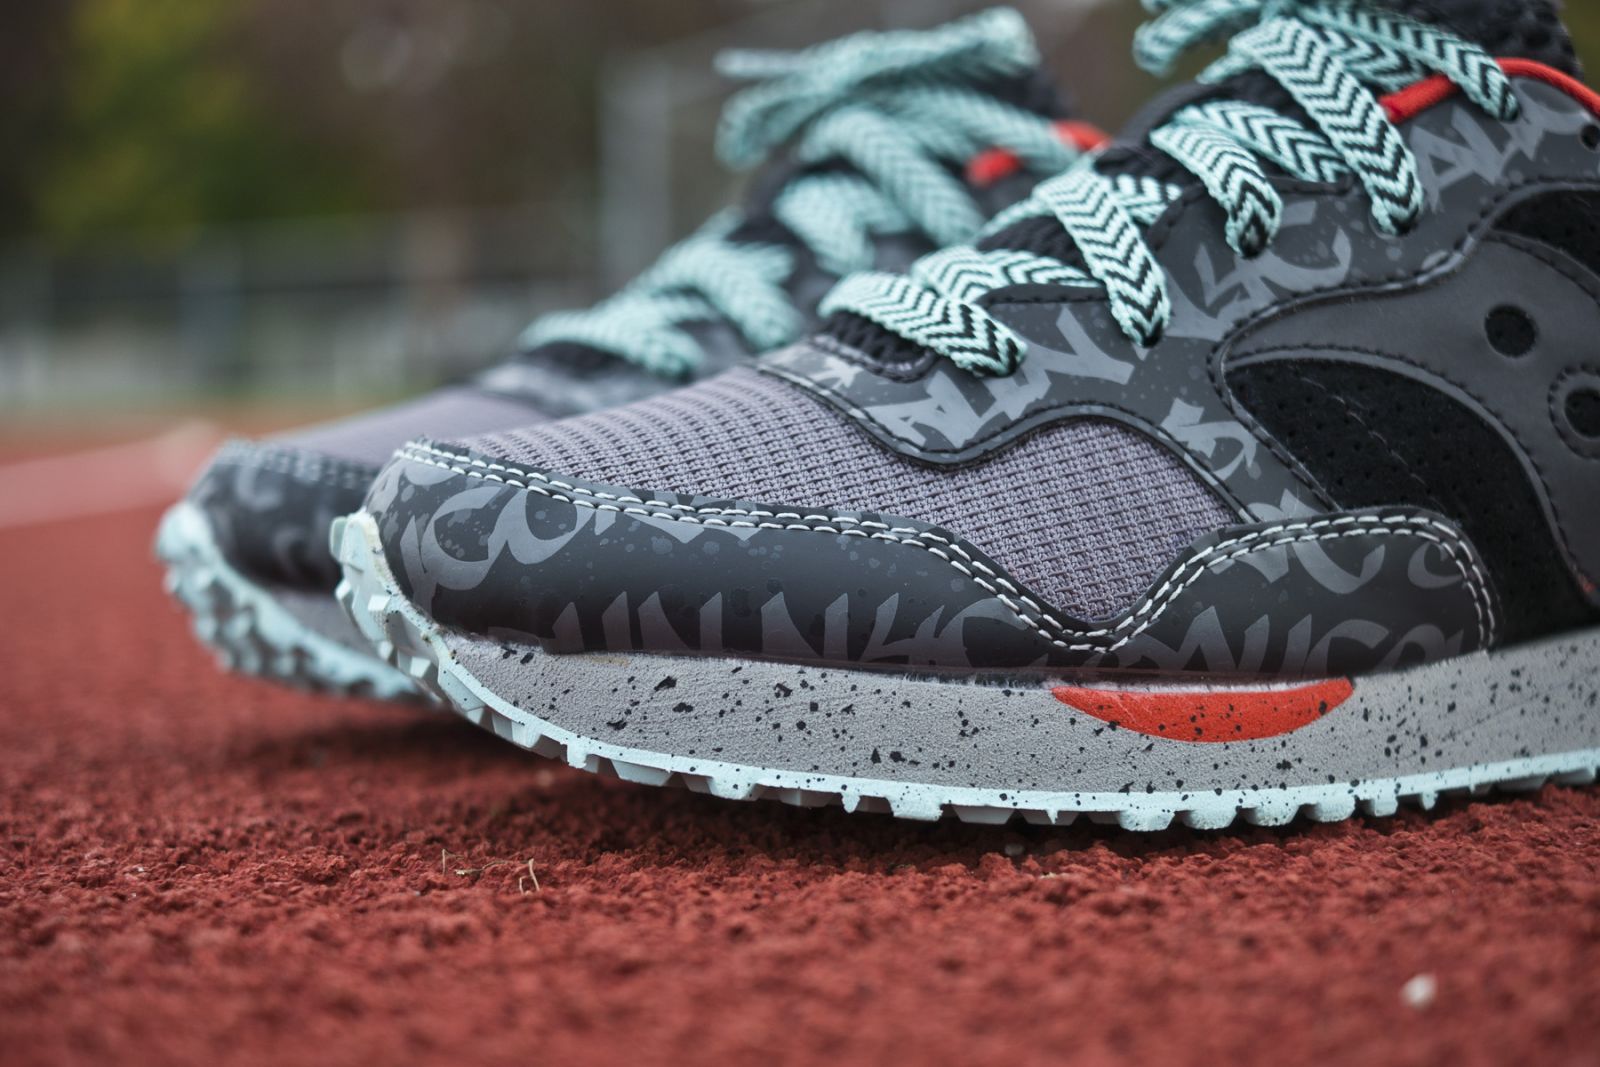 Saucony's DXN Trainer is ready for the 